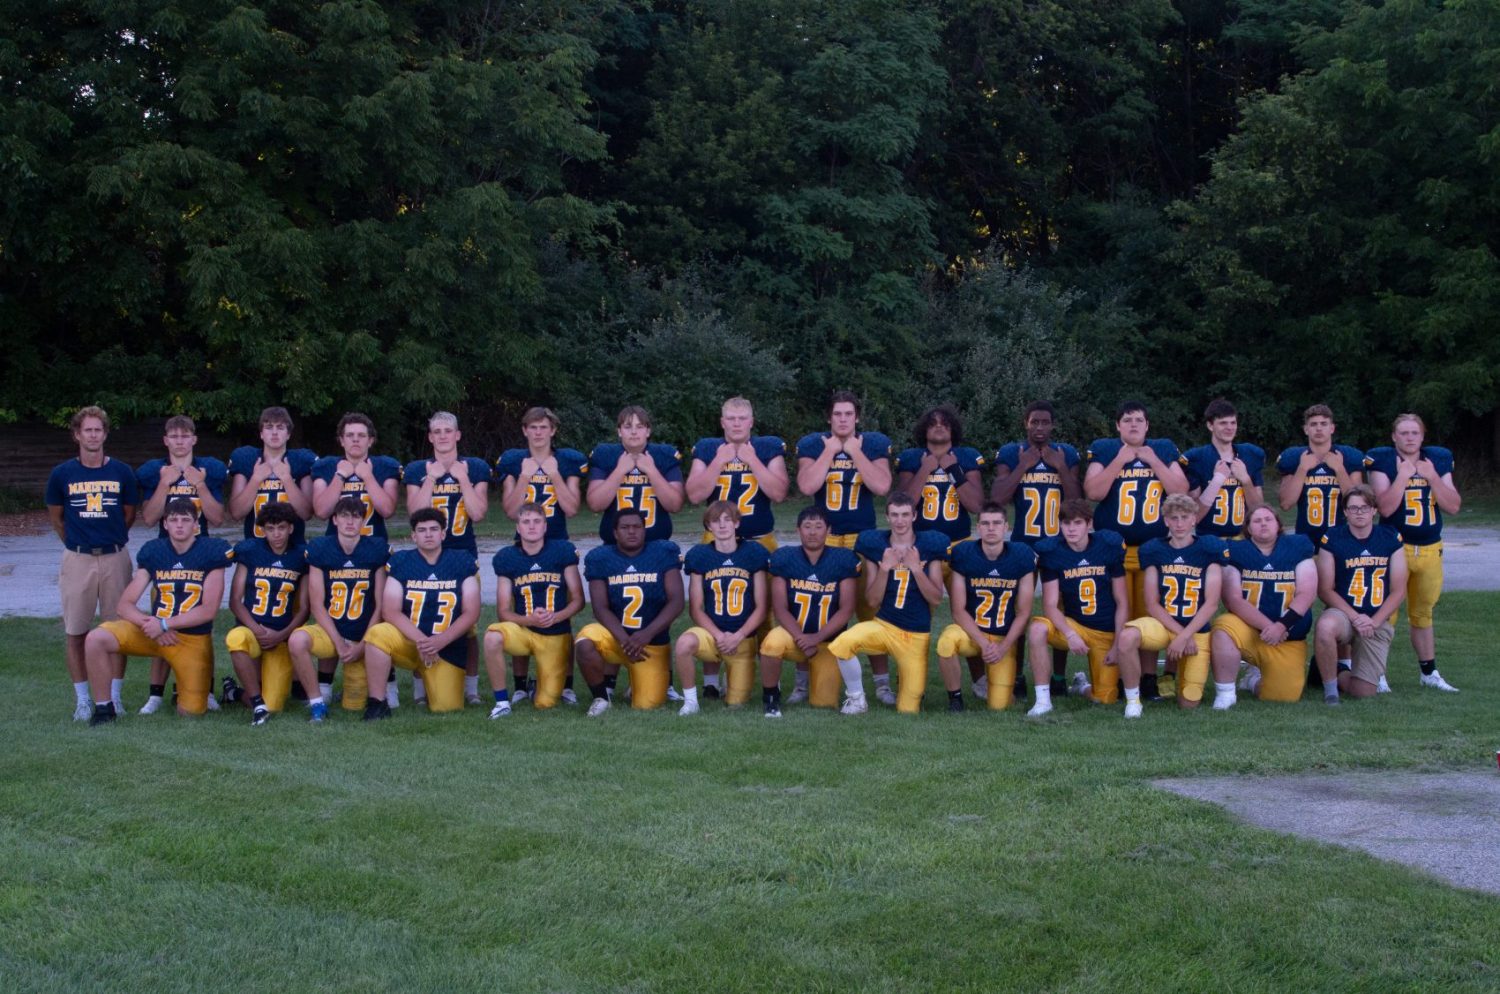 Manistee faces daunting task against highly ranked Boyne City in playoff opener